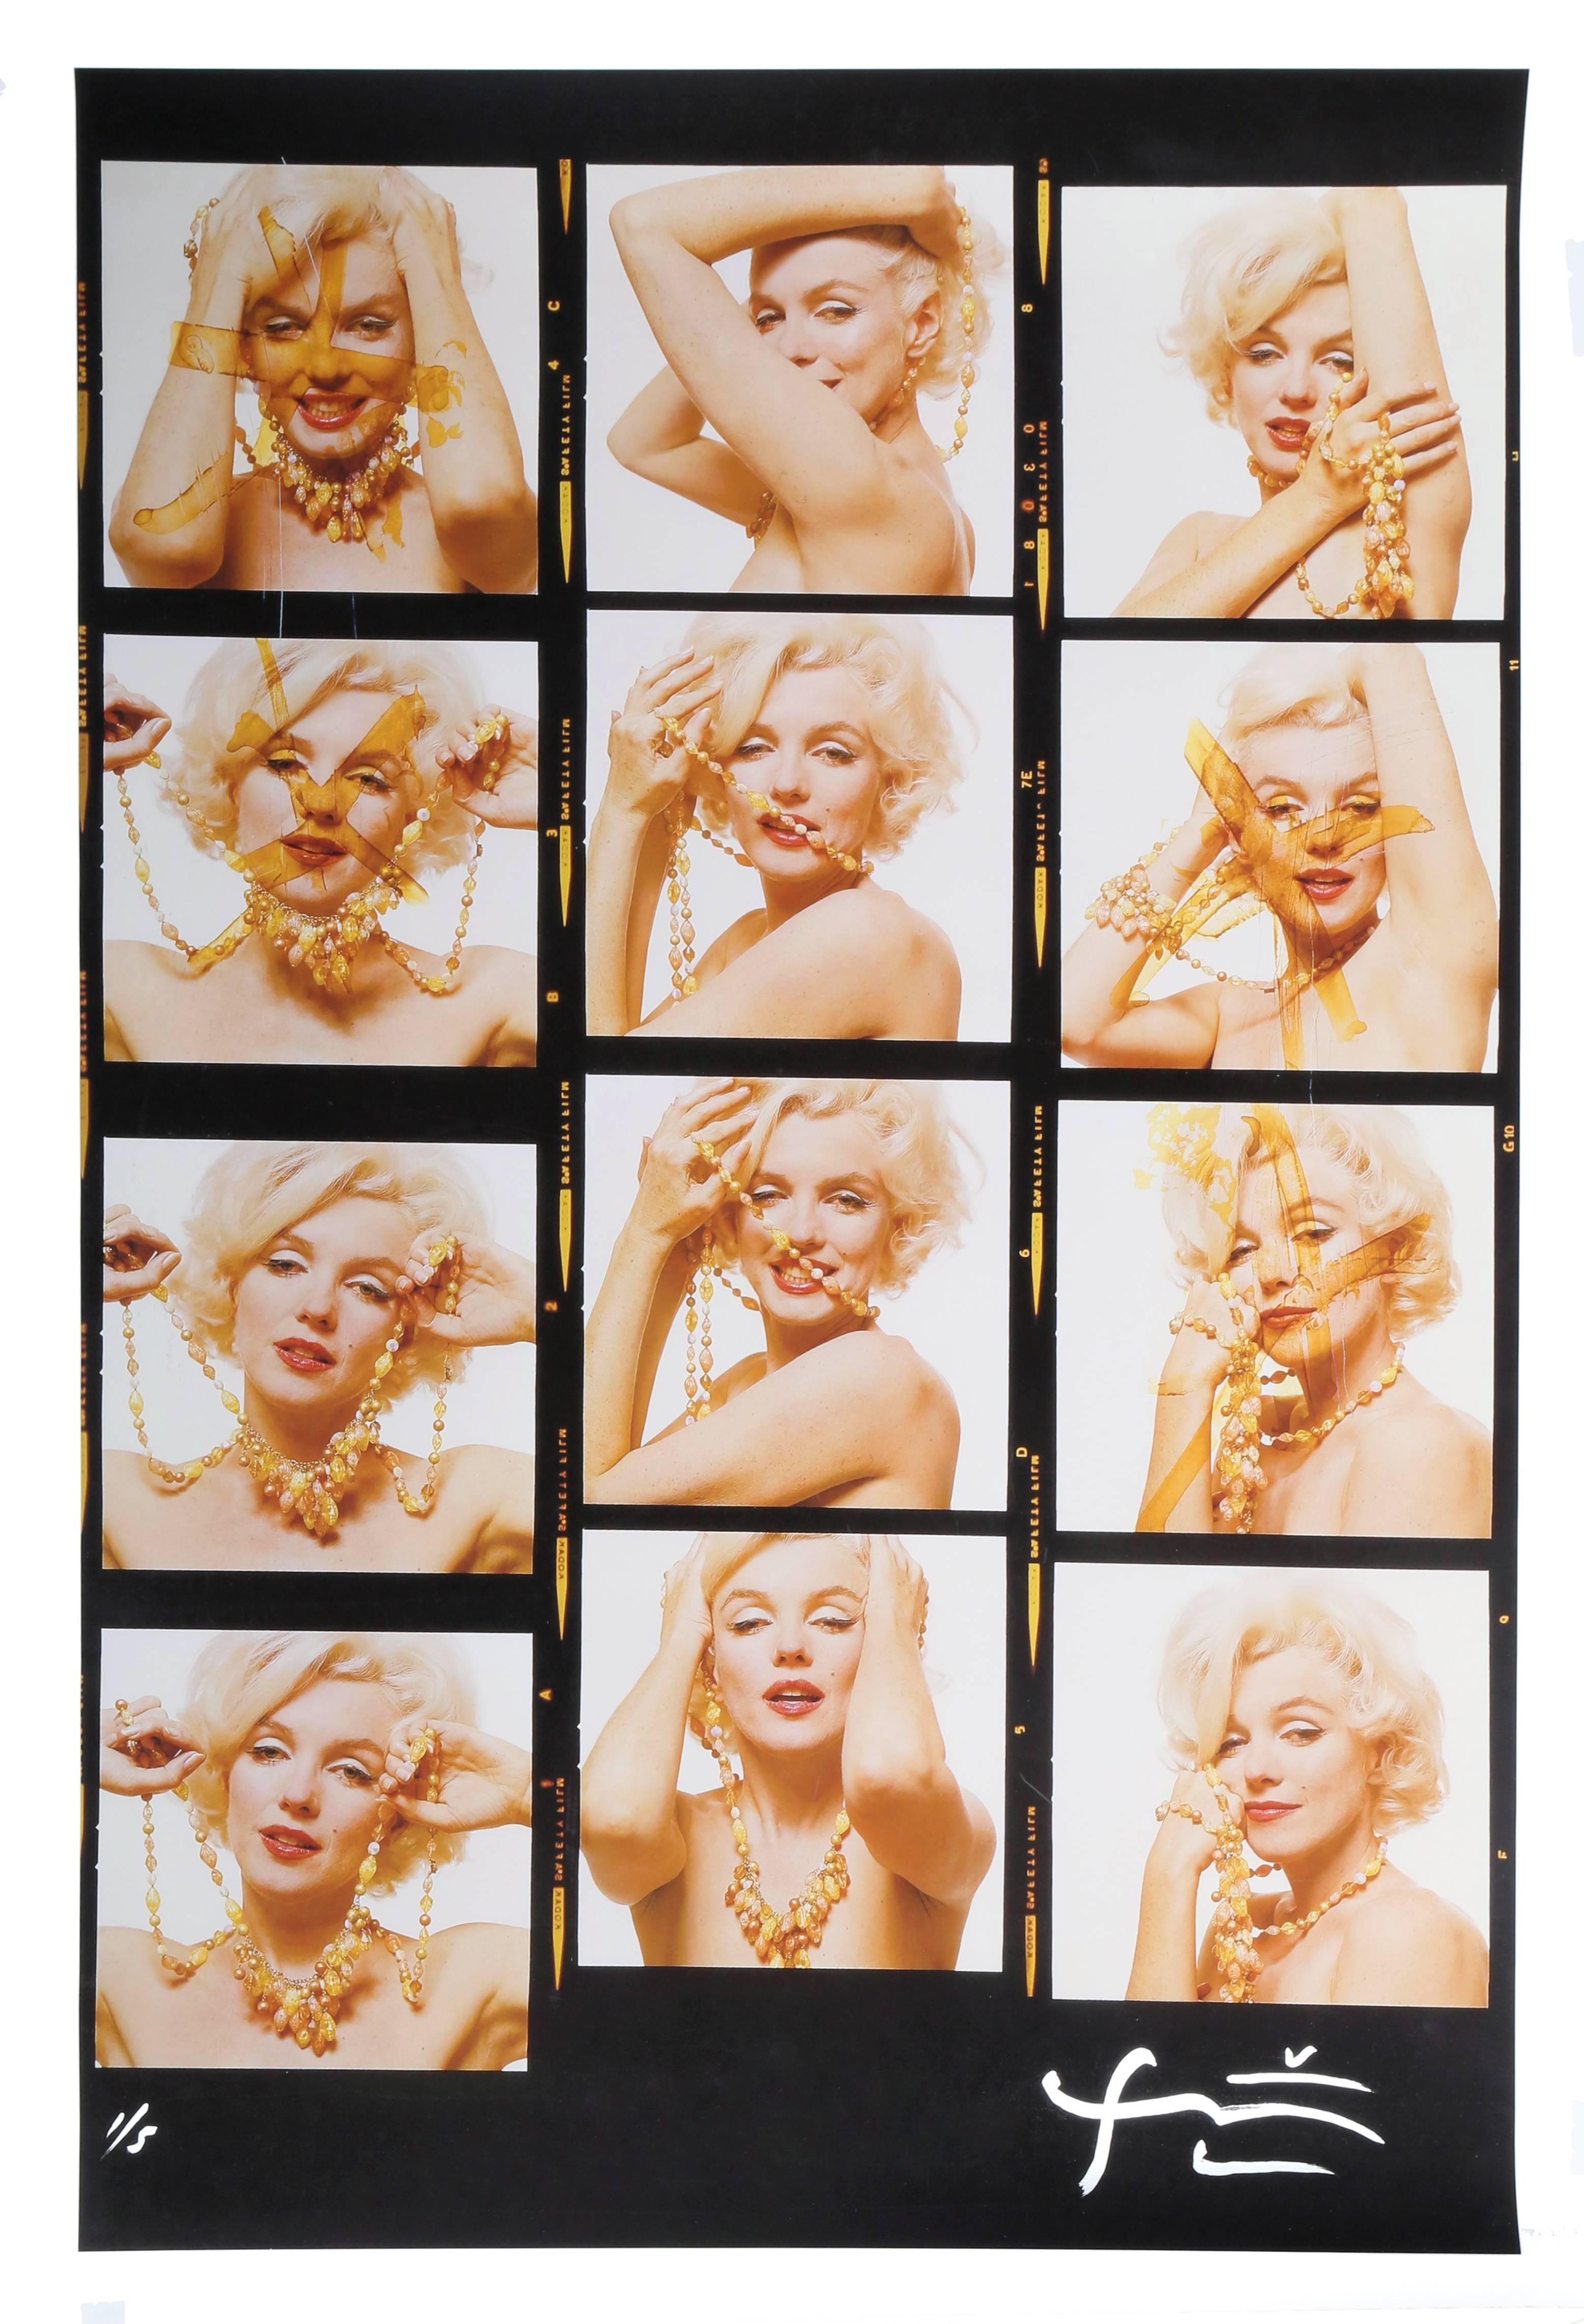 Bert Stern Portrait Photograph - Marilyn Monroe with jewels [Contact Sheet] from The Last Sitting for Vogue 